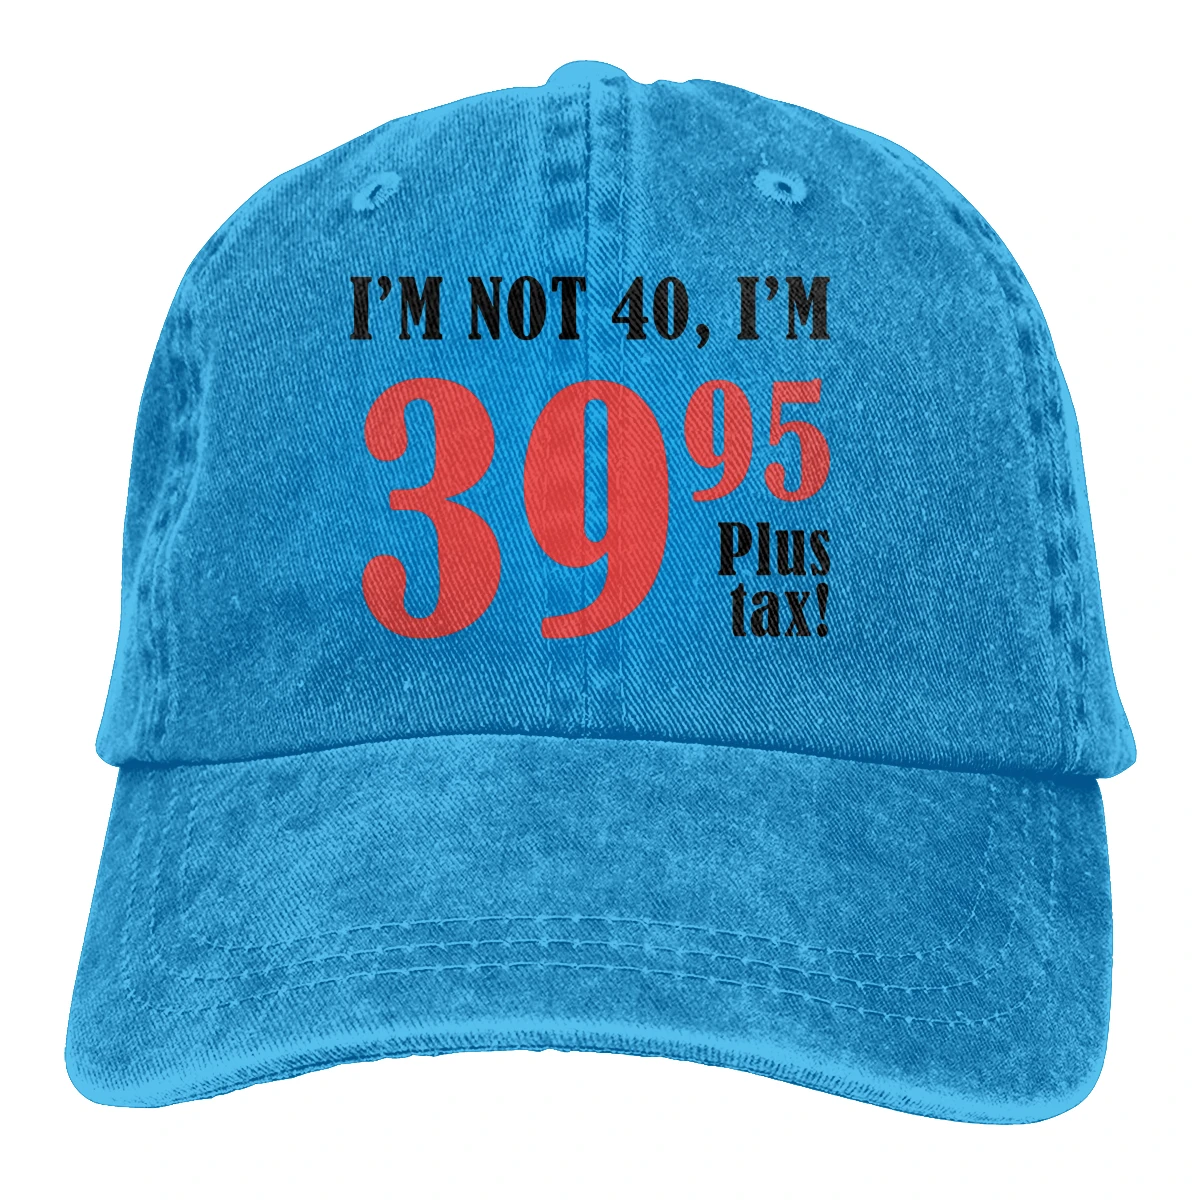 Funny 40th Birthday Gift (Plus Tax) The Baseball Cap Peaked capt Sport Unisex Outdoor Custom 40 Years Old Born in 1981 Hats